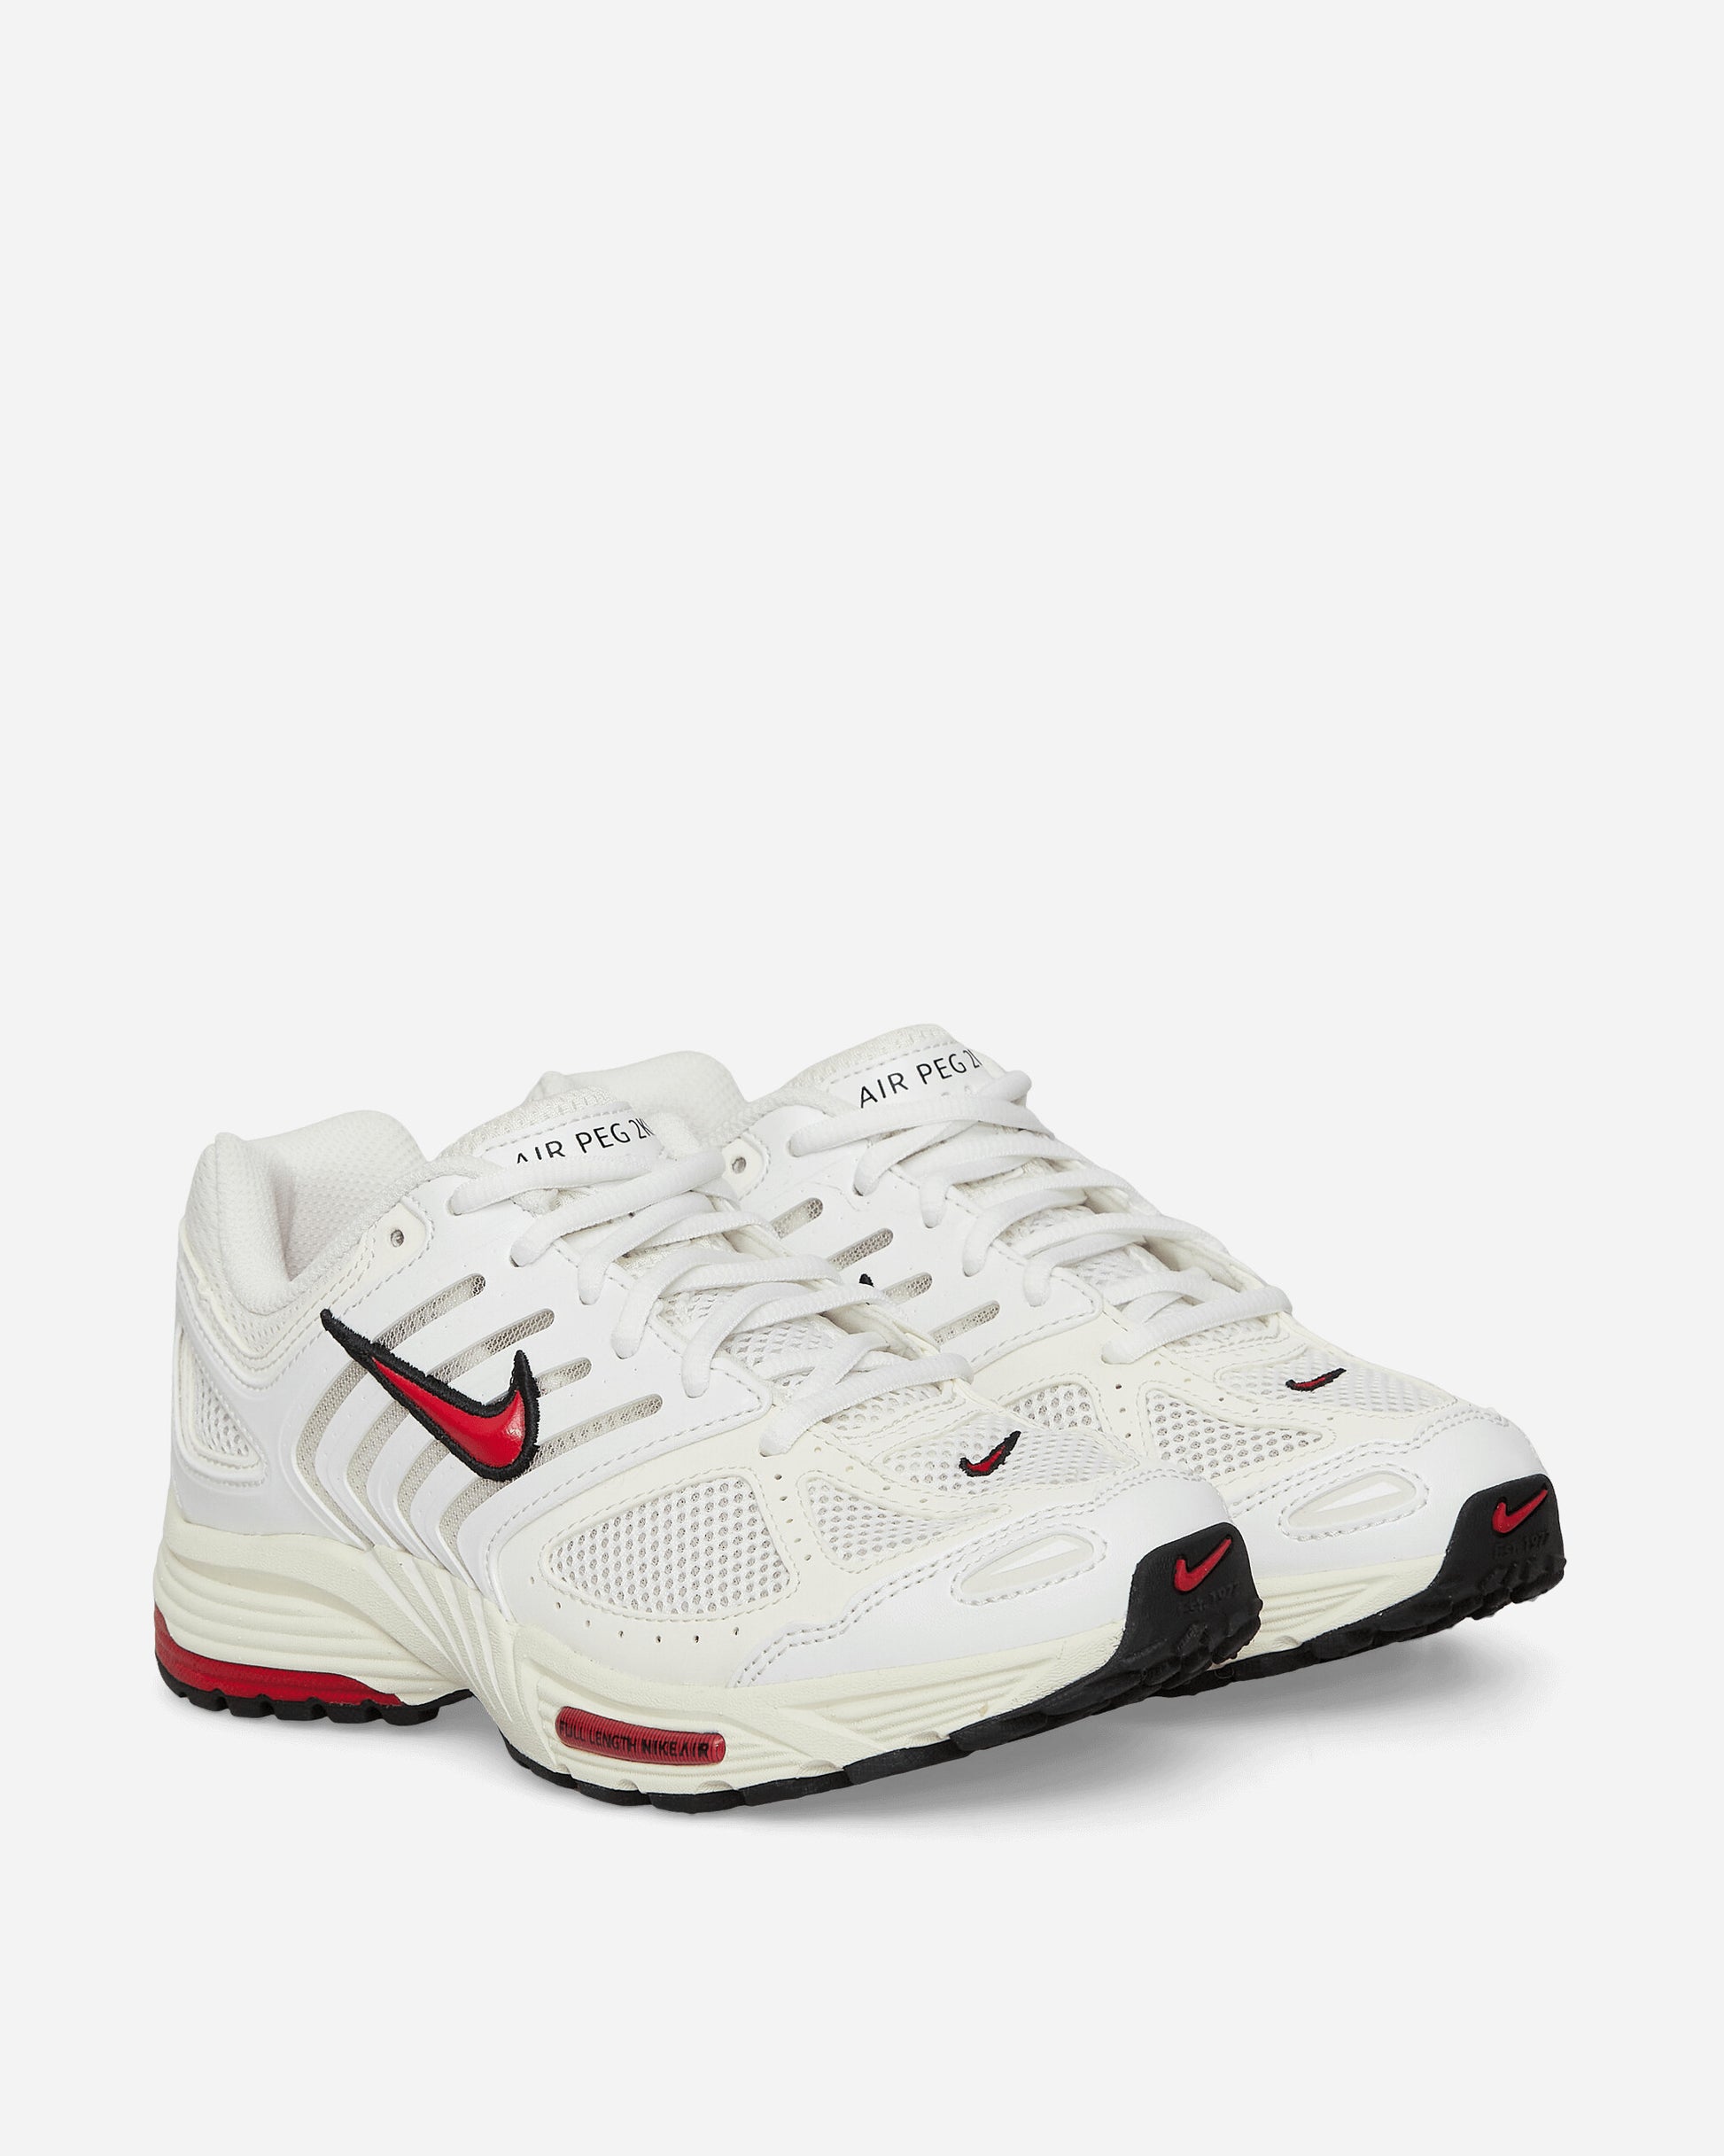 Nike Wmns Air Peg 2K5 White/Gym Red Sneakers Low FN7153-101